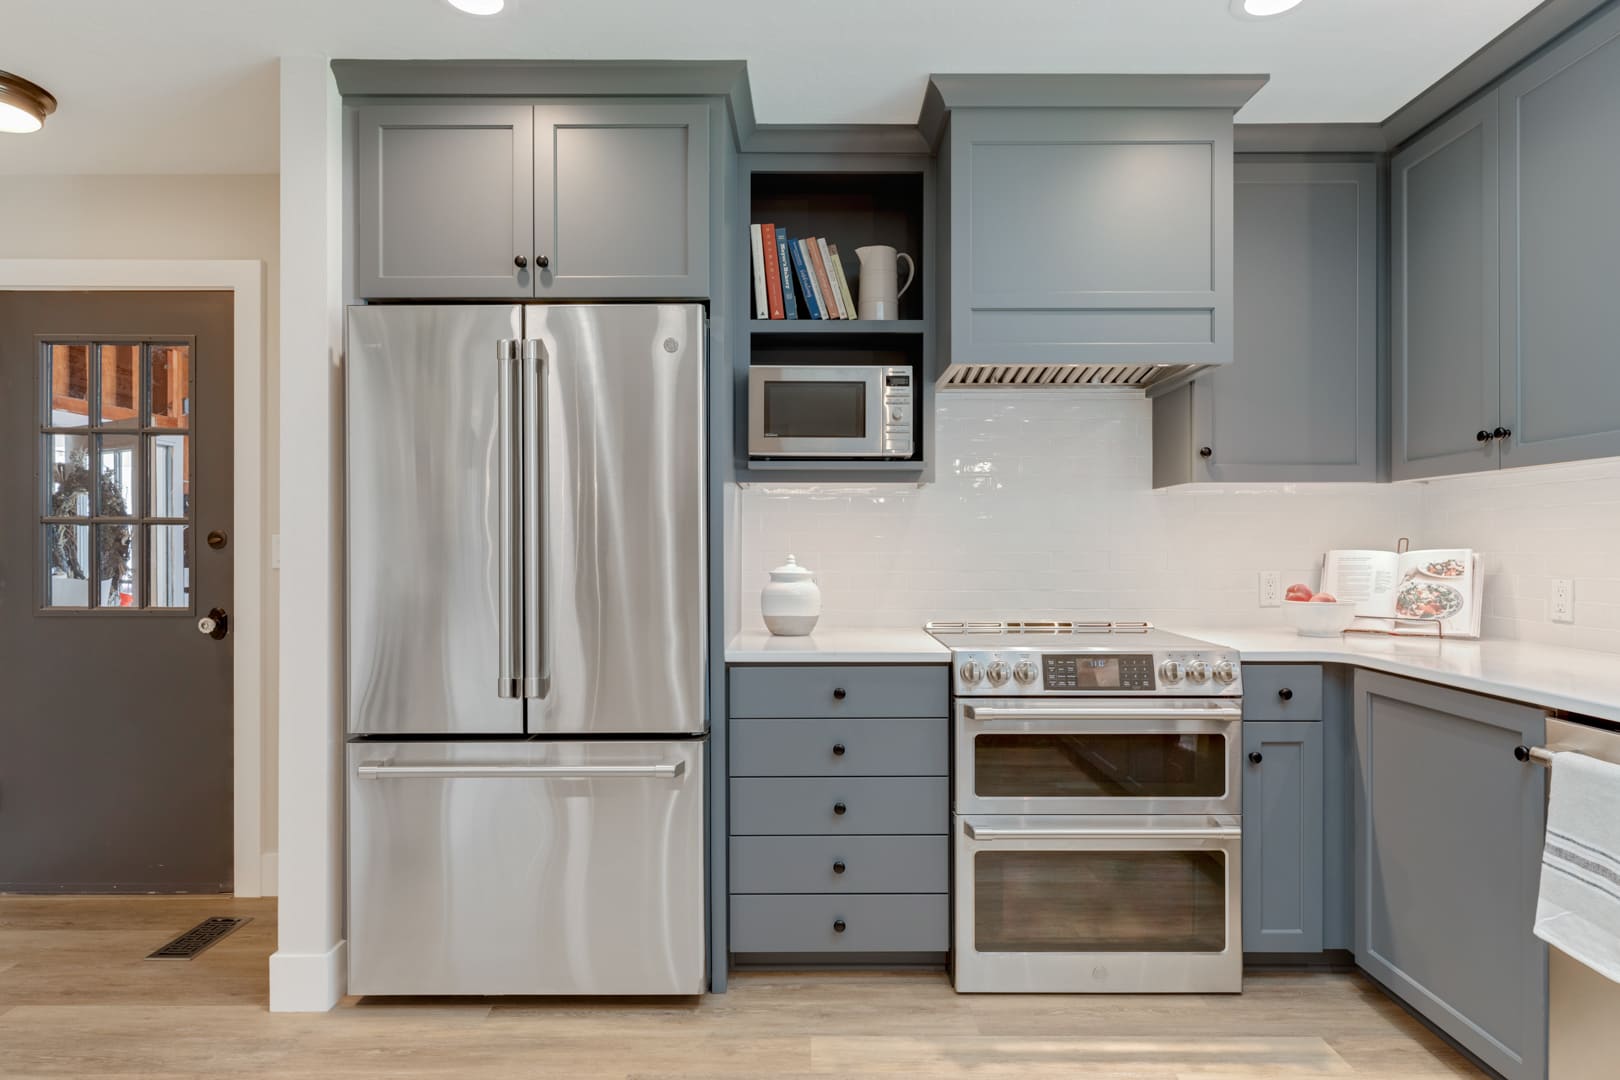 7 Kitchen Styles to Consider for Your Corvallis, Oregon Home